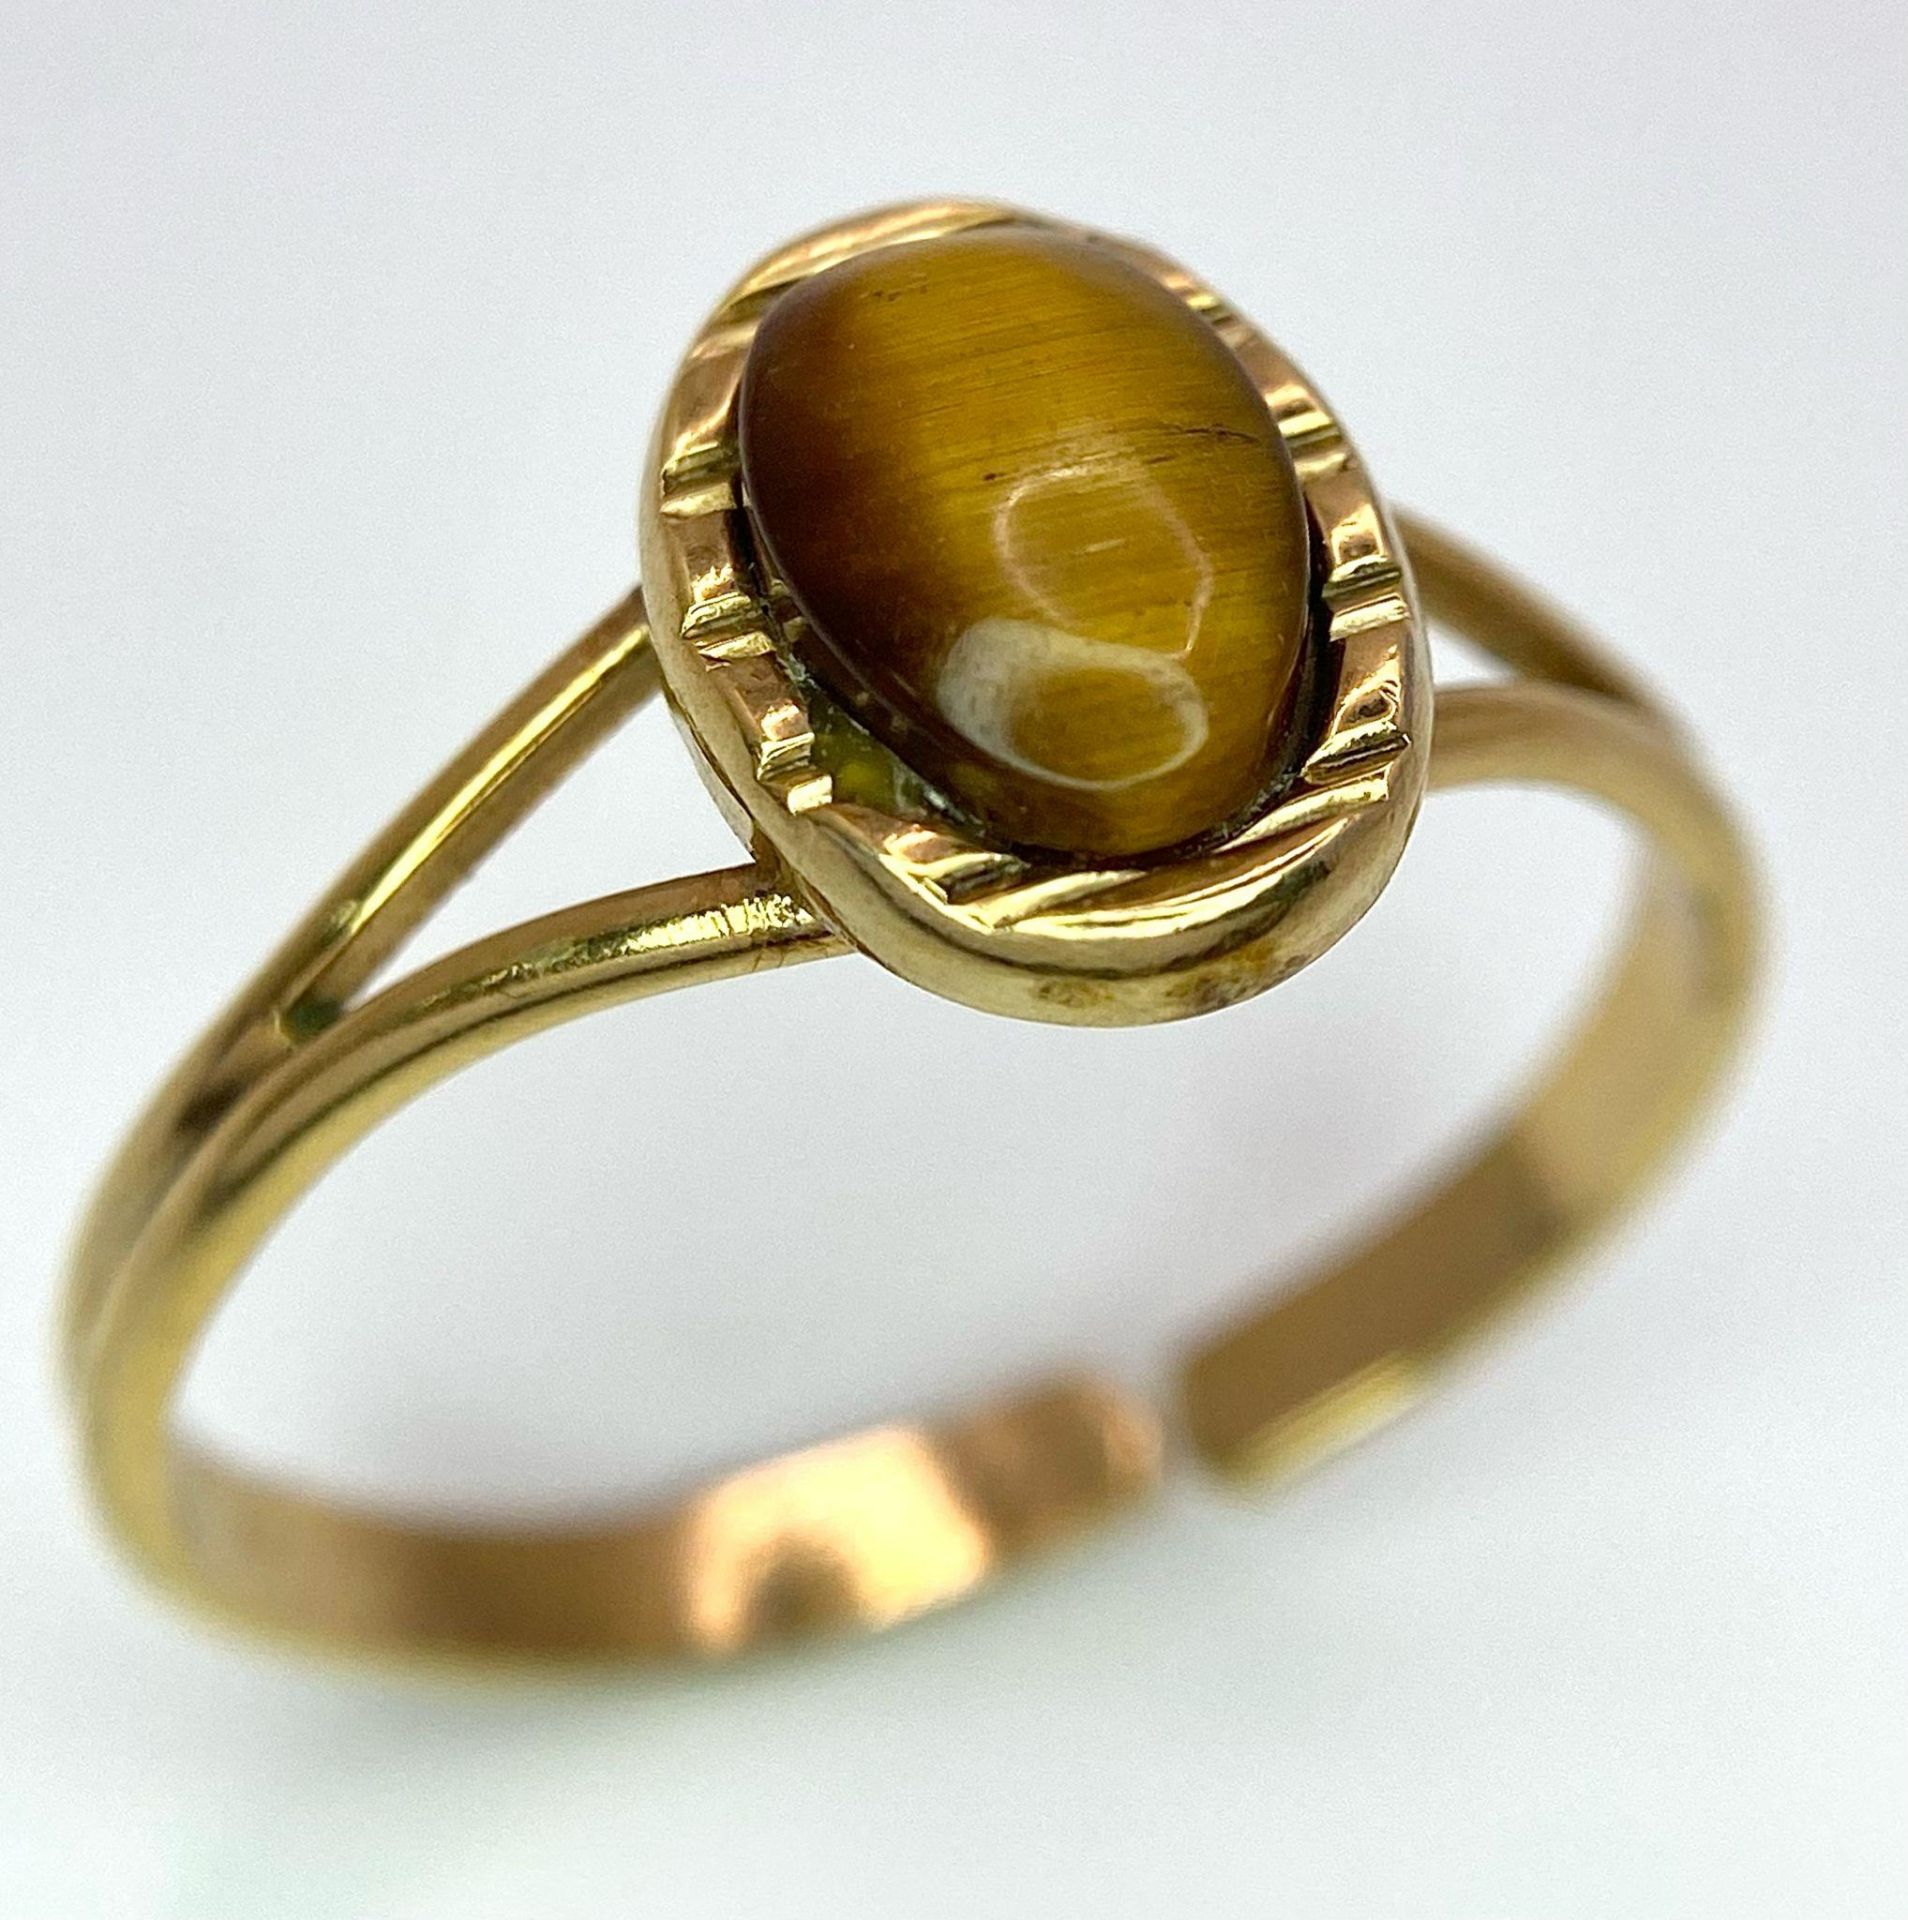 A 9K GOLD ADJUSTABLE RING WITH TIGERS EYE STONE . 2.4gms one size